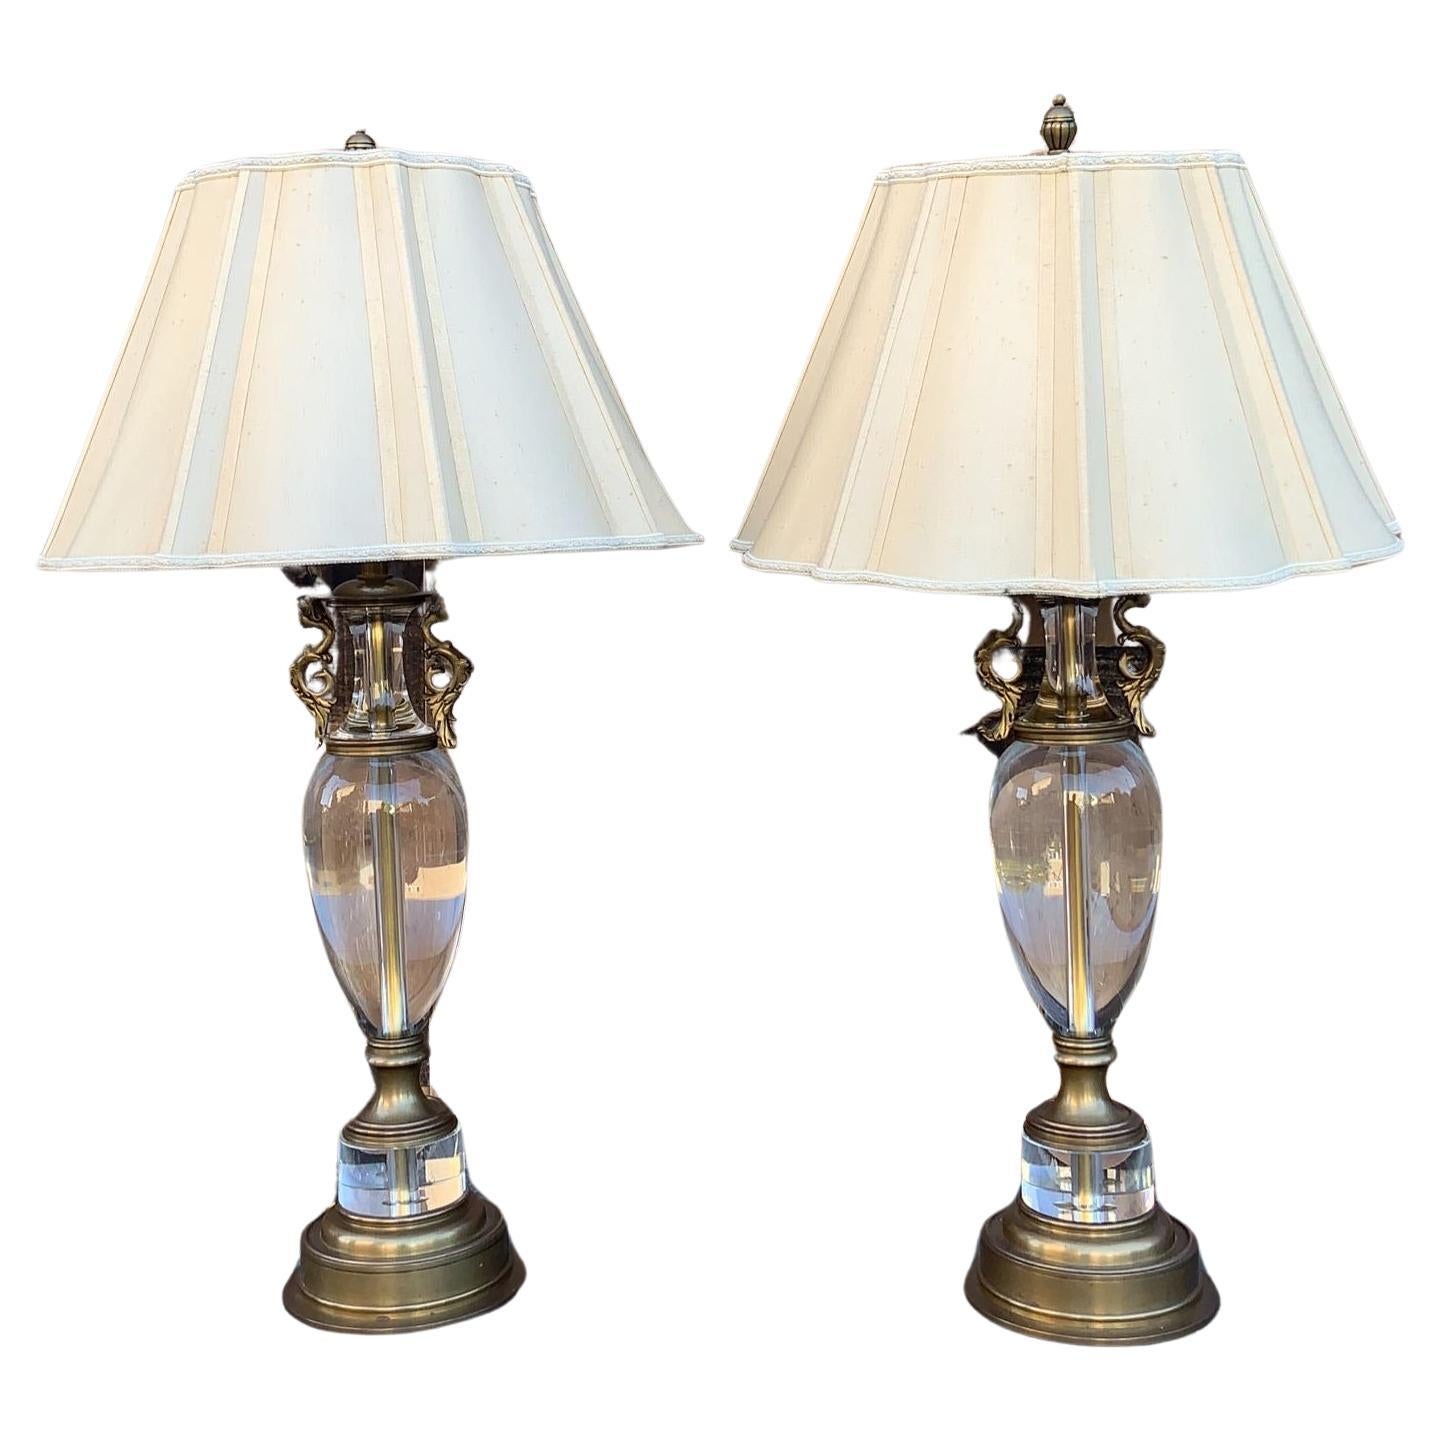 Regency Decorative Crafts 5585 Sainsbury Figural Table Lamp with Shade - Pair For Sale